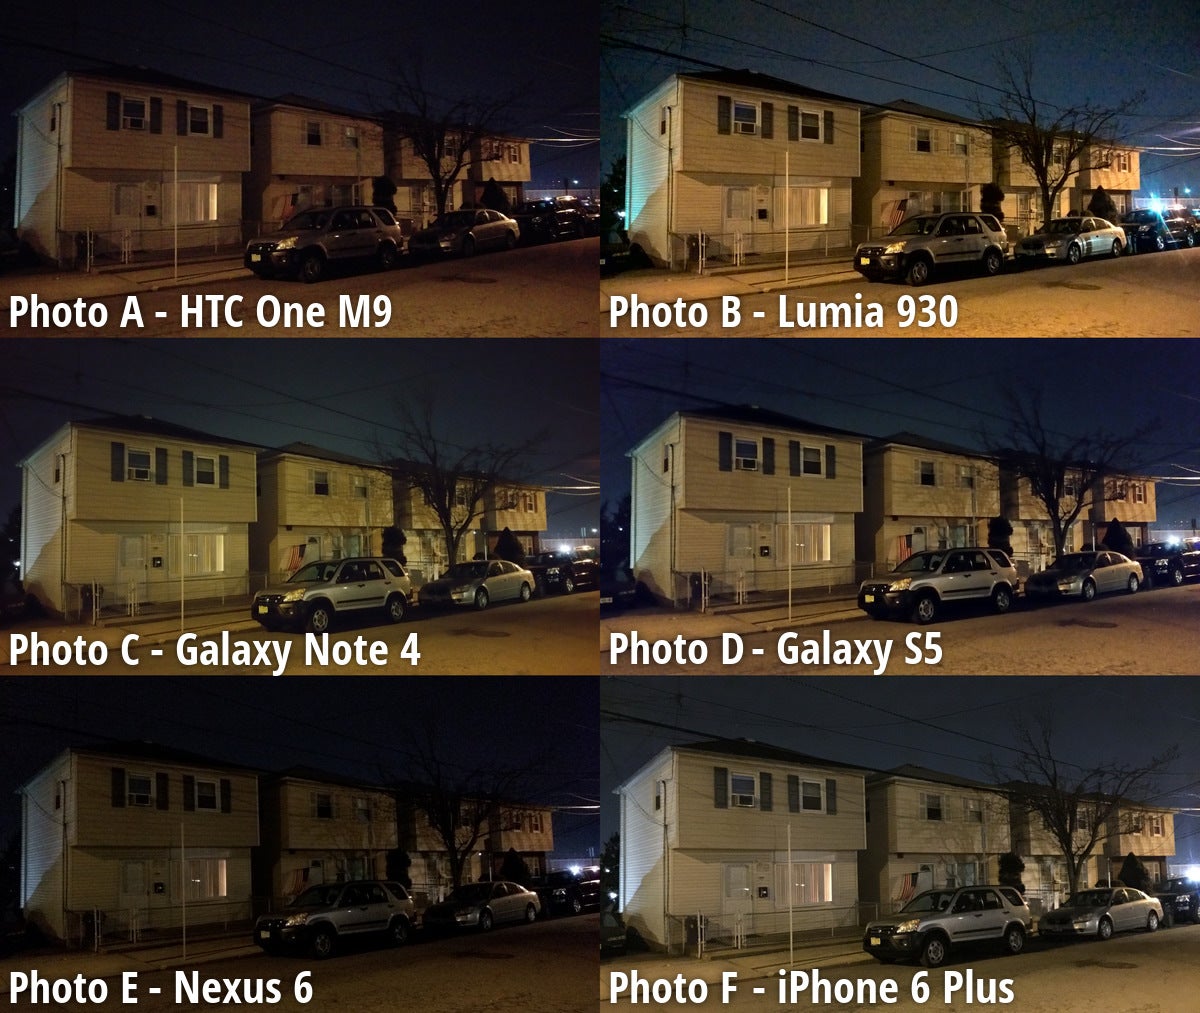 Side-by-side preview - Nokia Lumia 930 wins our blind camera comparison, followed by Galaxy Note 4; HTC One M9 ends up last